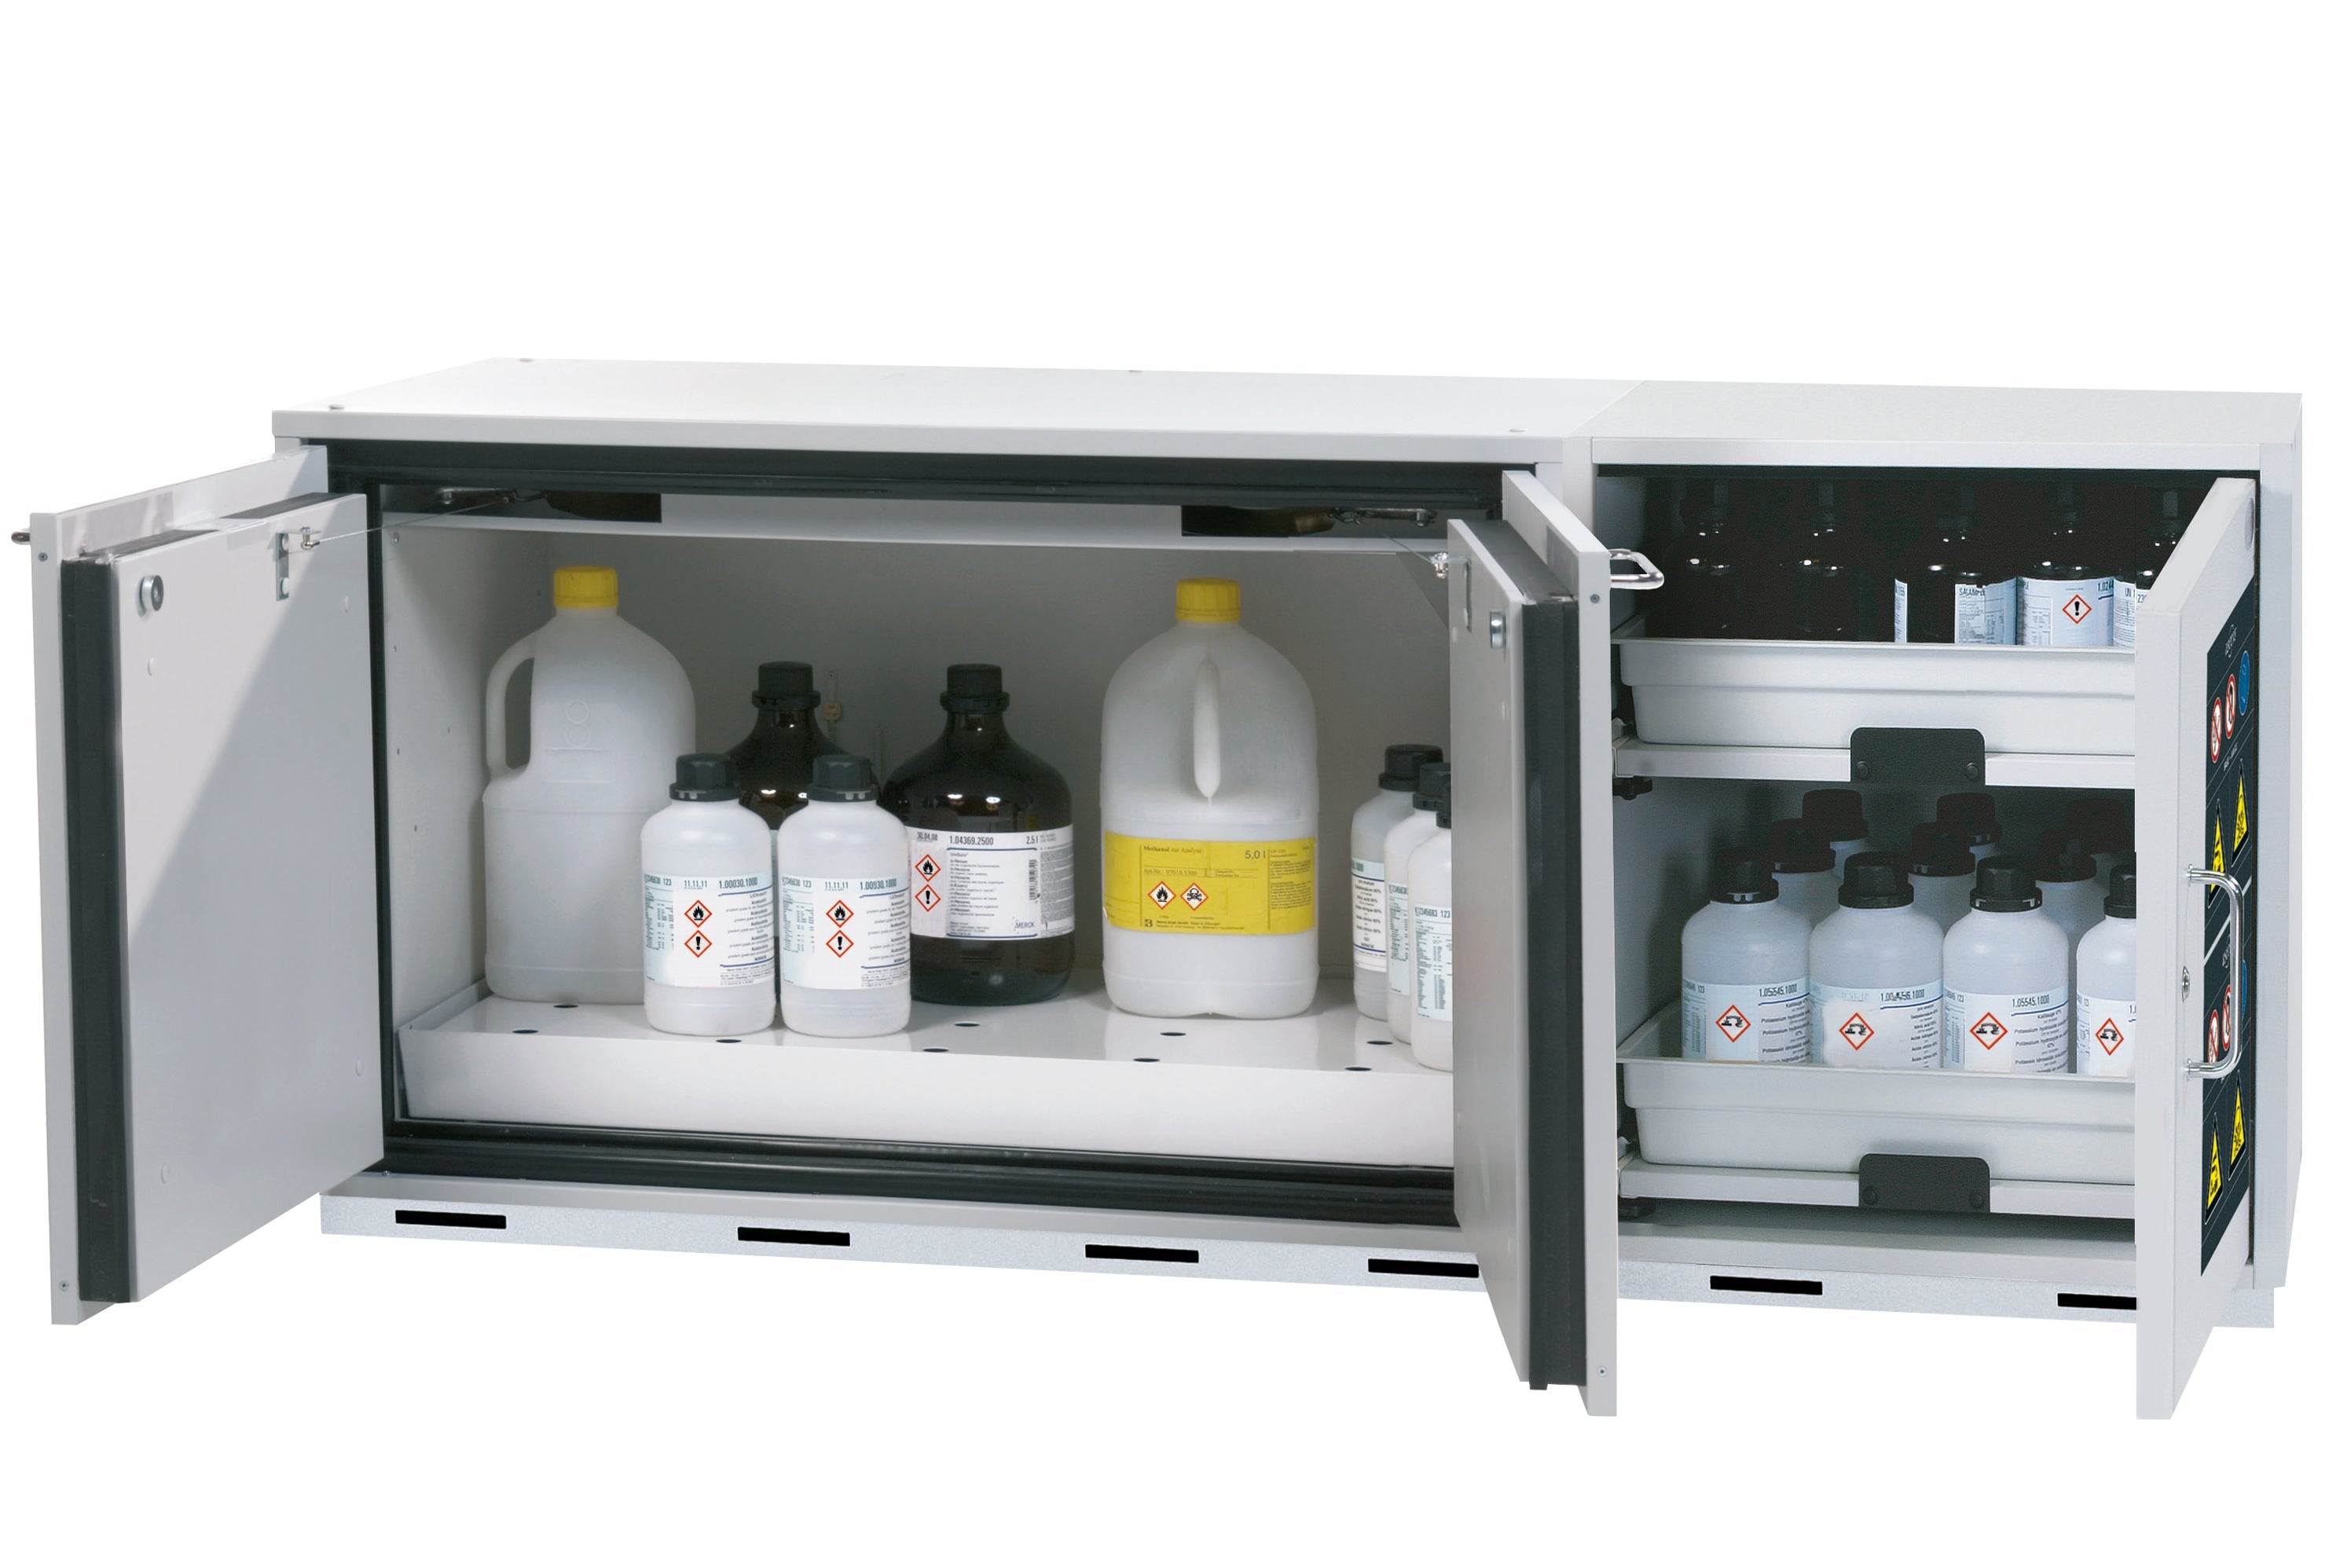 Type 90 combination safety cabinet K-UB-90 model K90.060.140.050.UB.3T in light gray RAL 7035 with 1x perforated sheet insert standard (sheet steel)